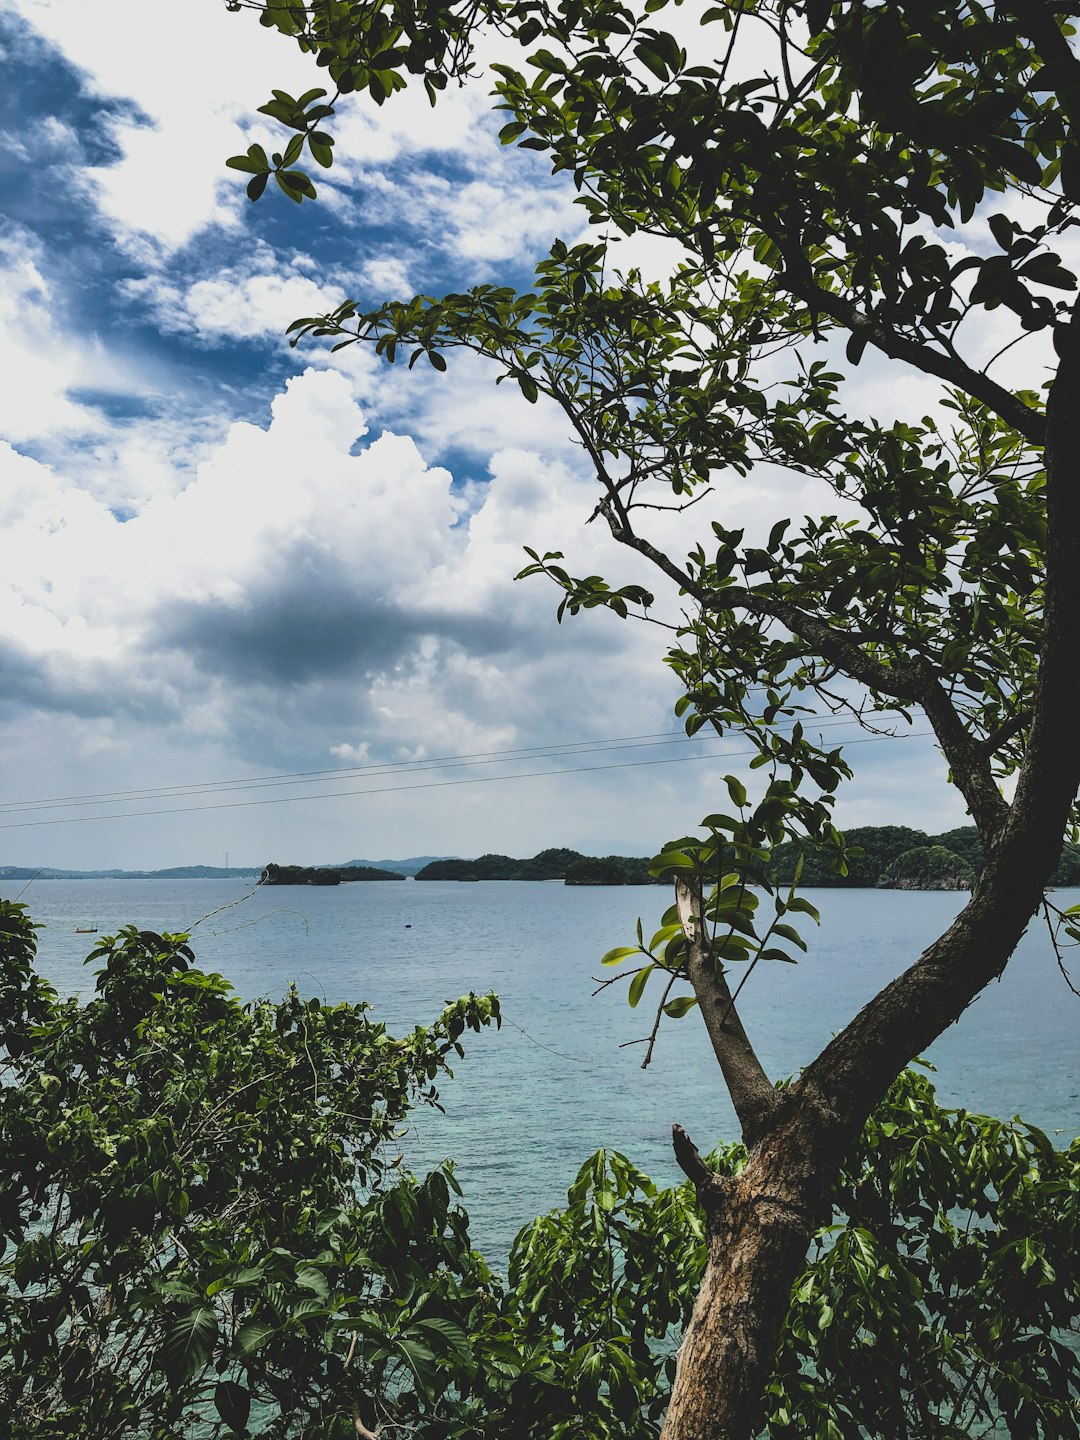 Travel Tips and Stories of Hundred Islands in Philippines